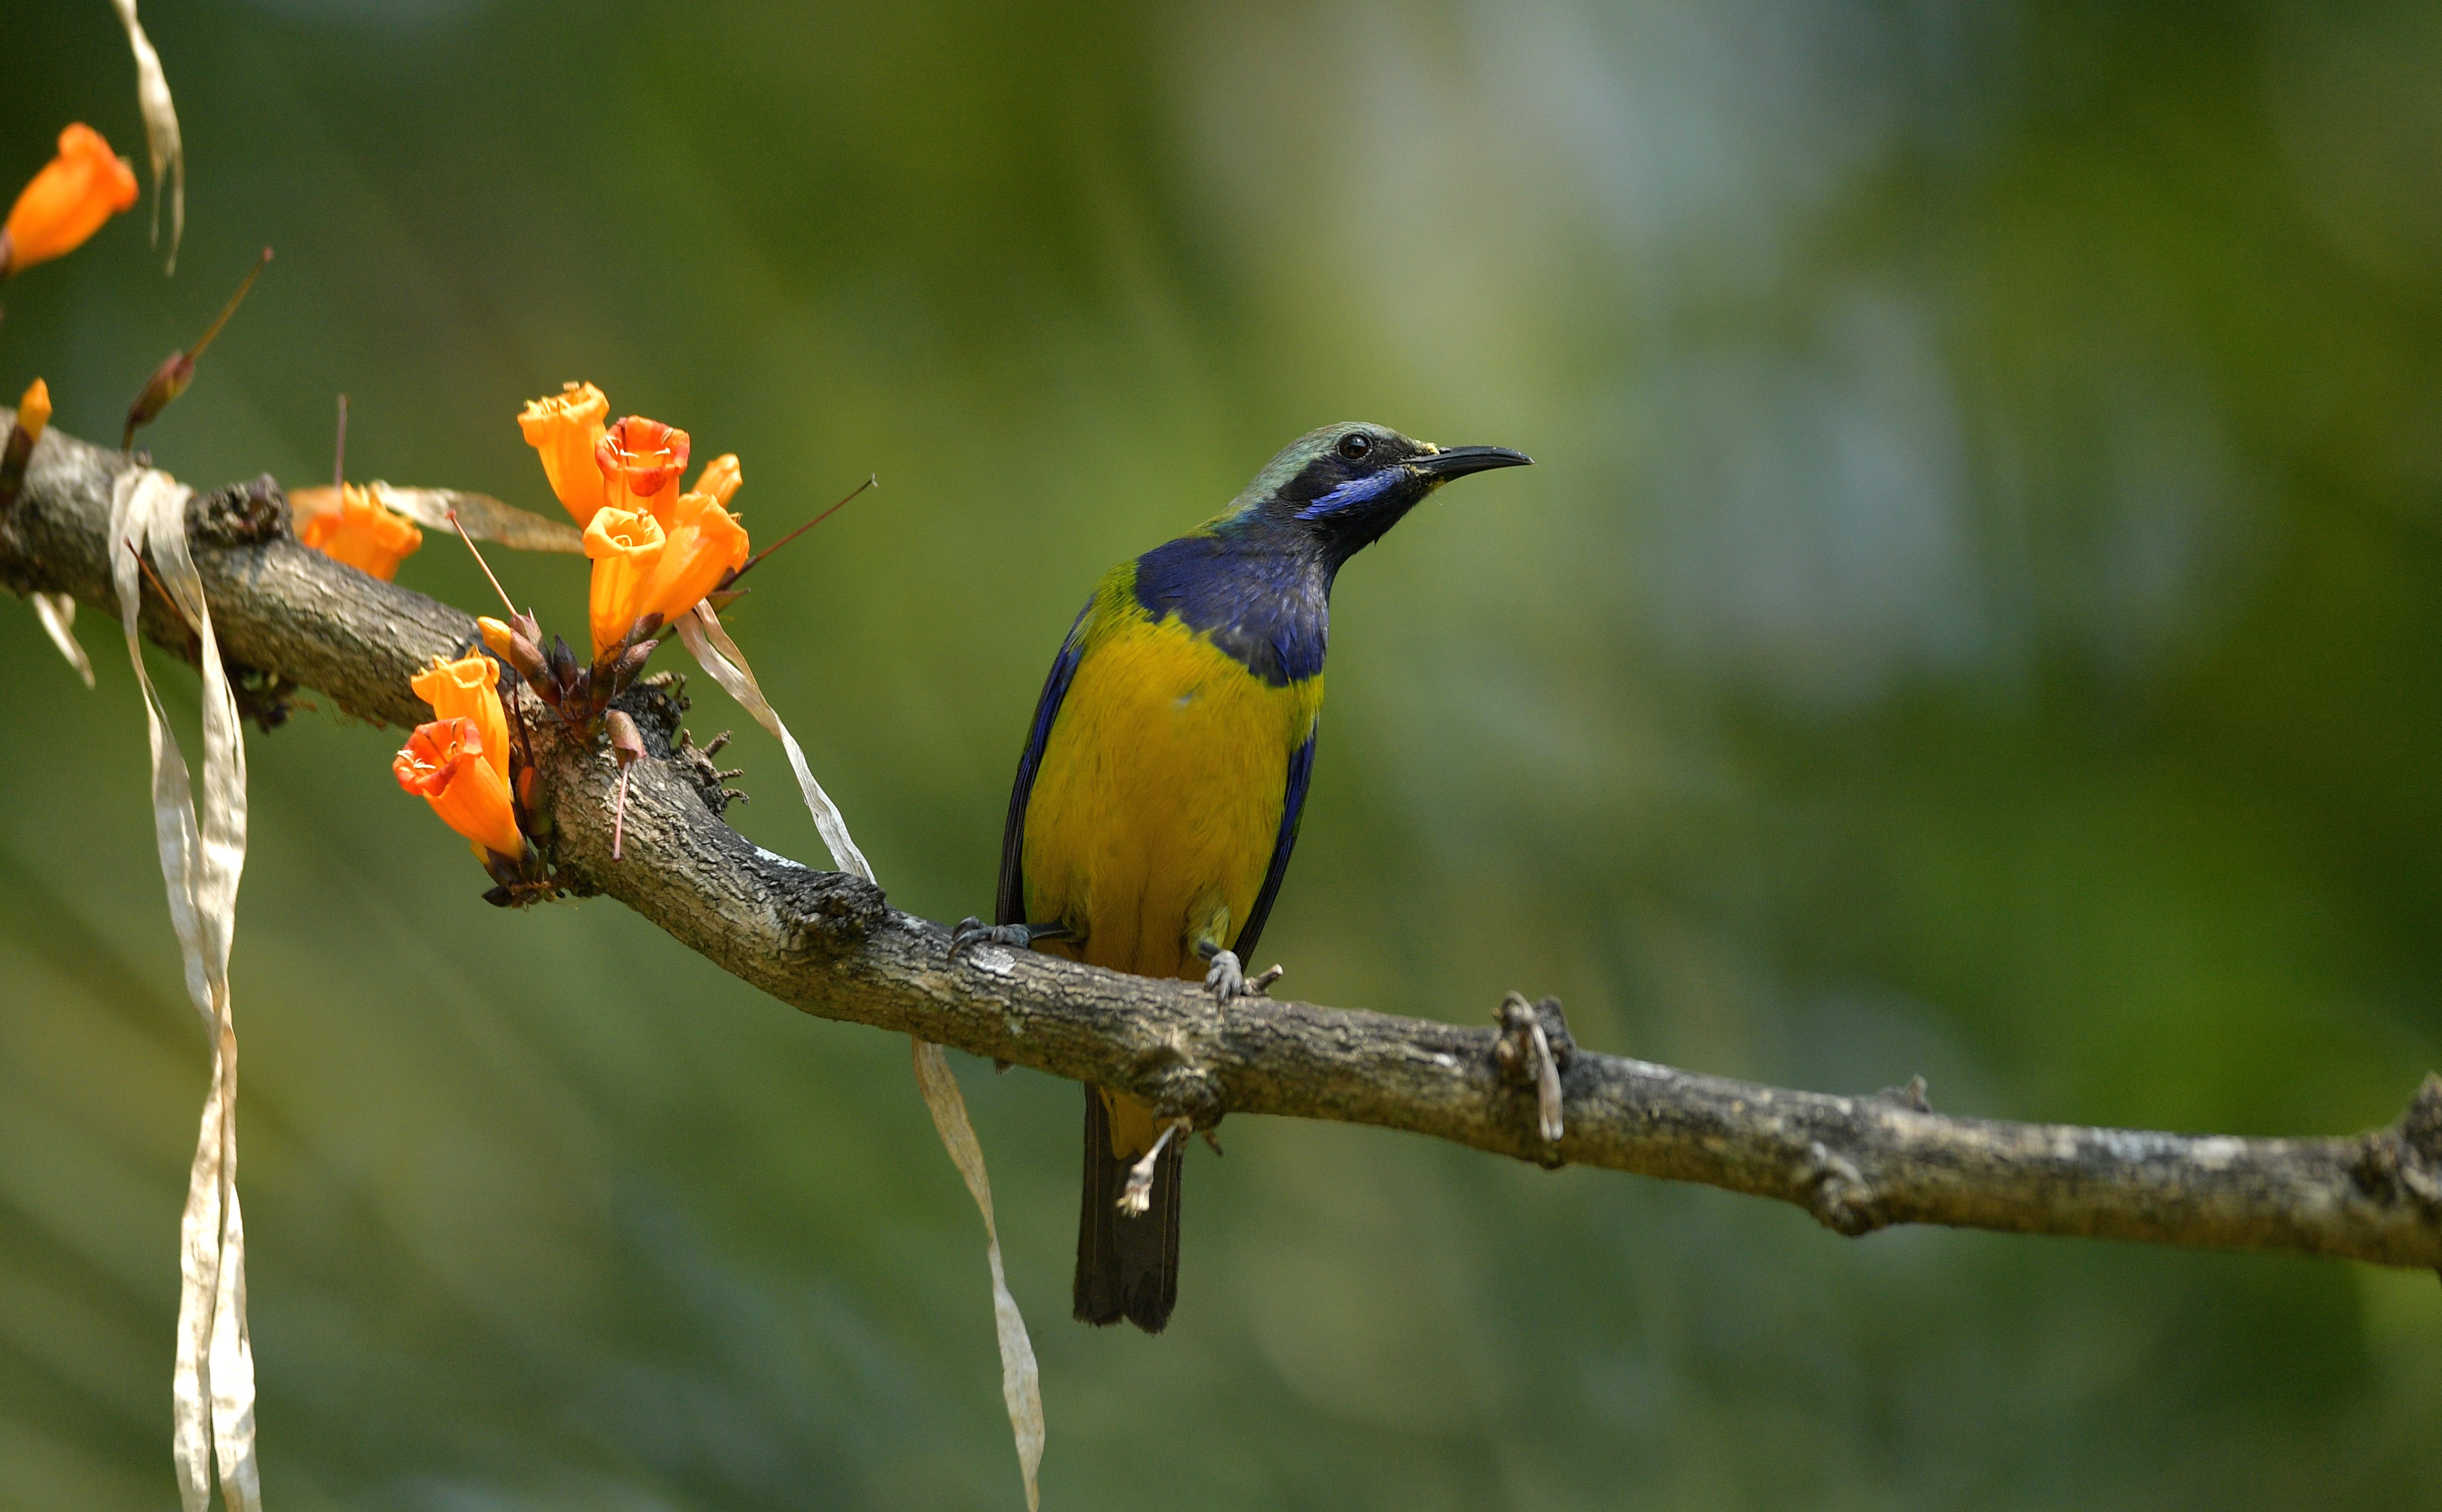 An orange-bellied leafbird in the Bawangling National Nature Reserve, Hainan Province, south China. /Lin Ge